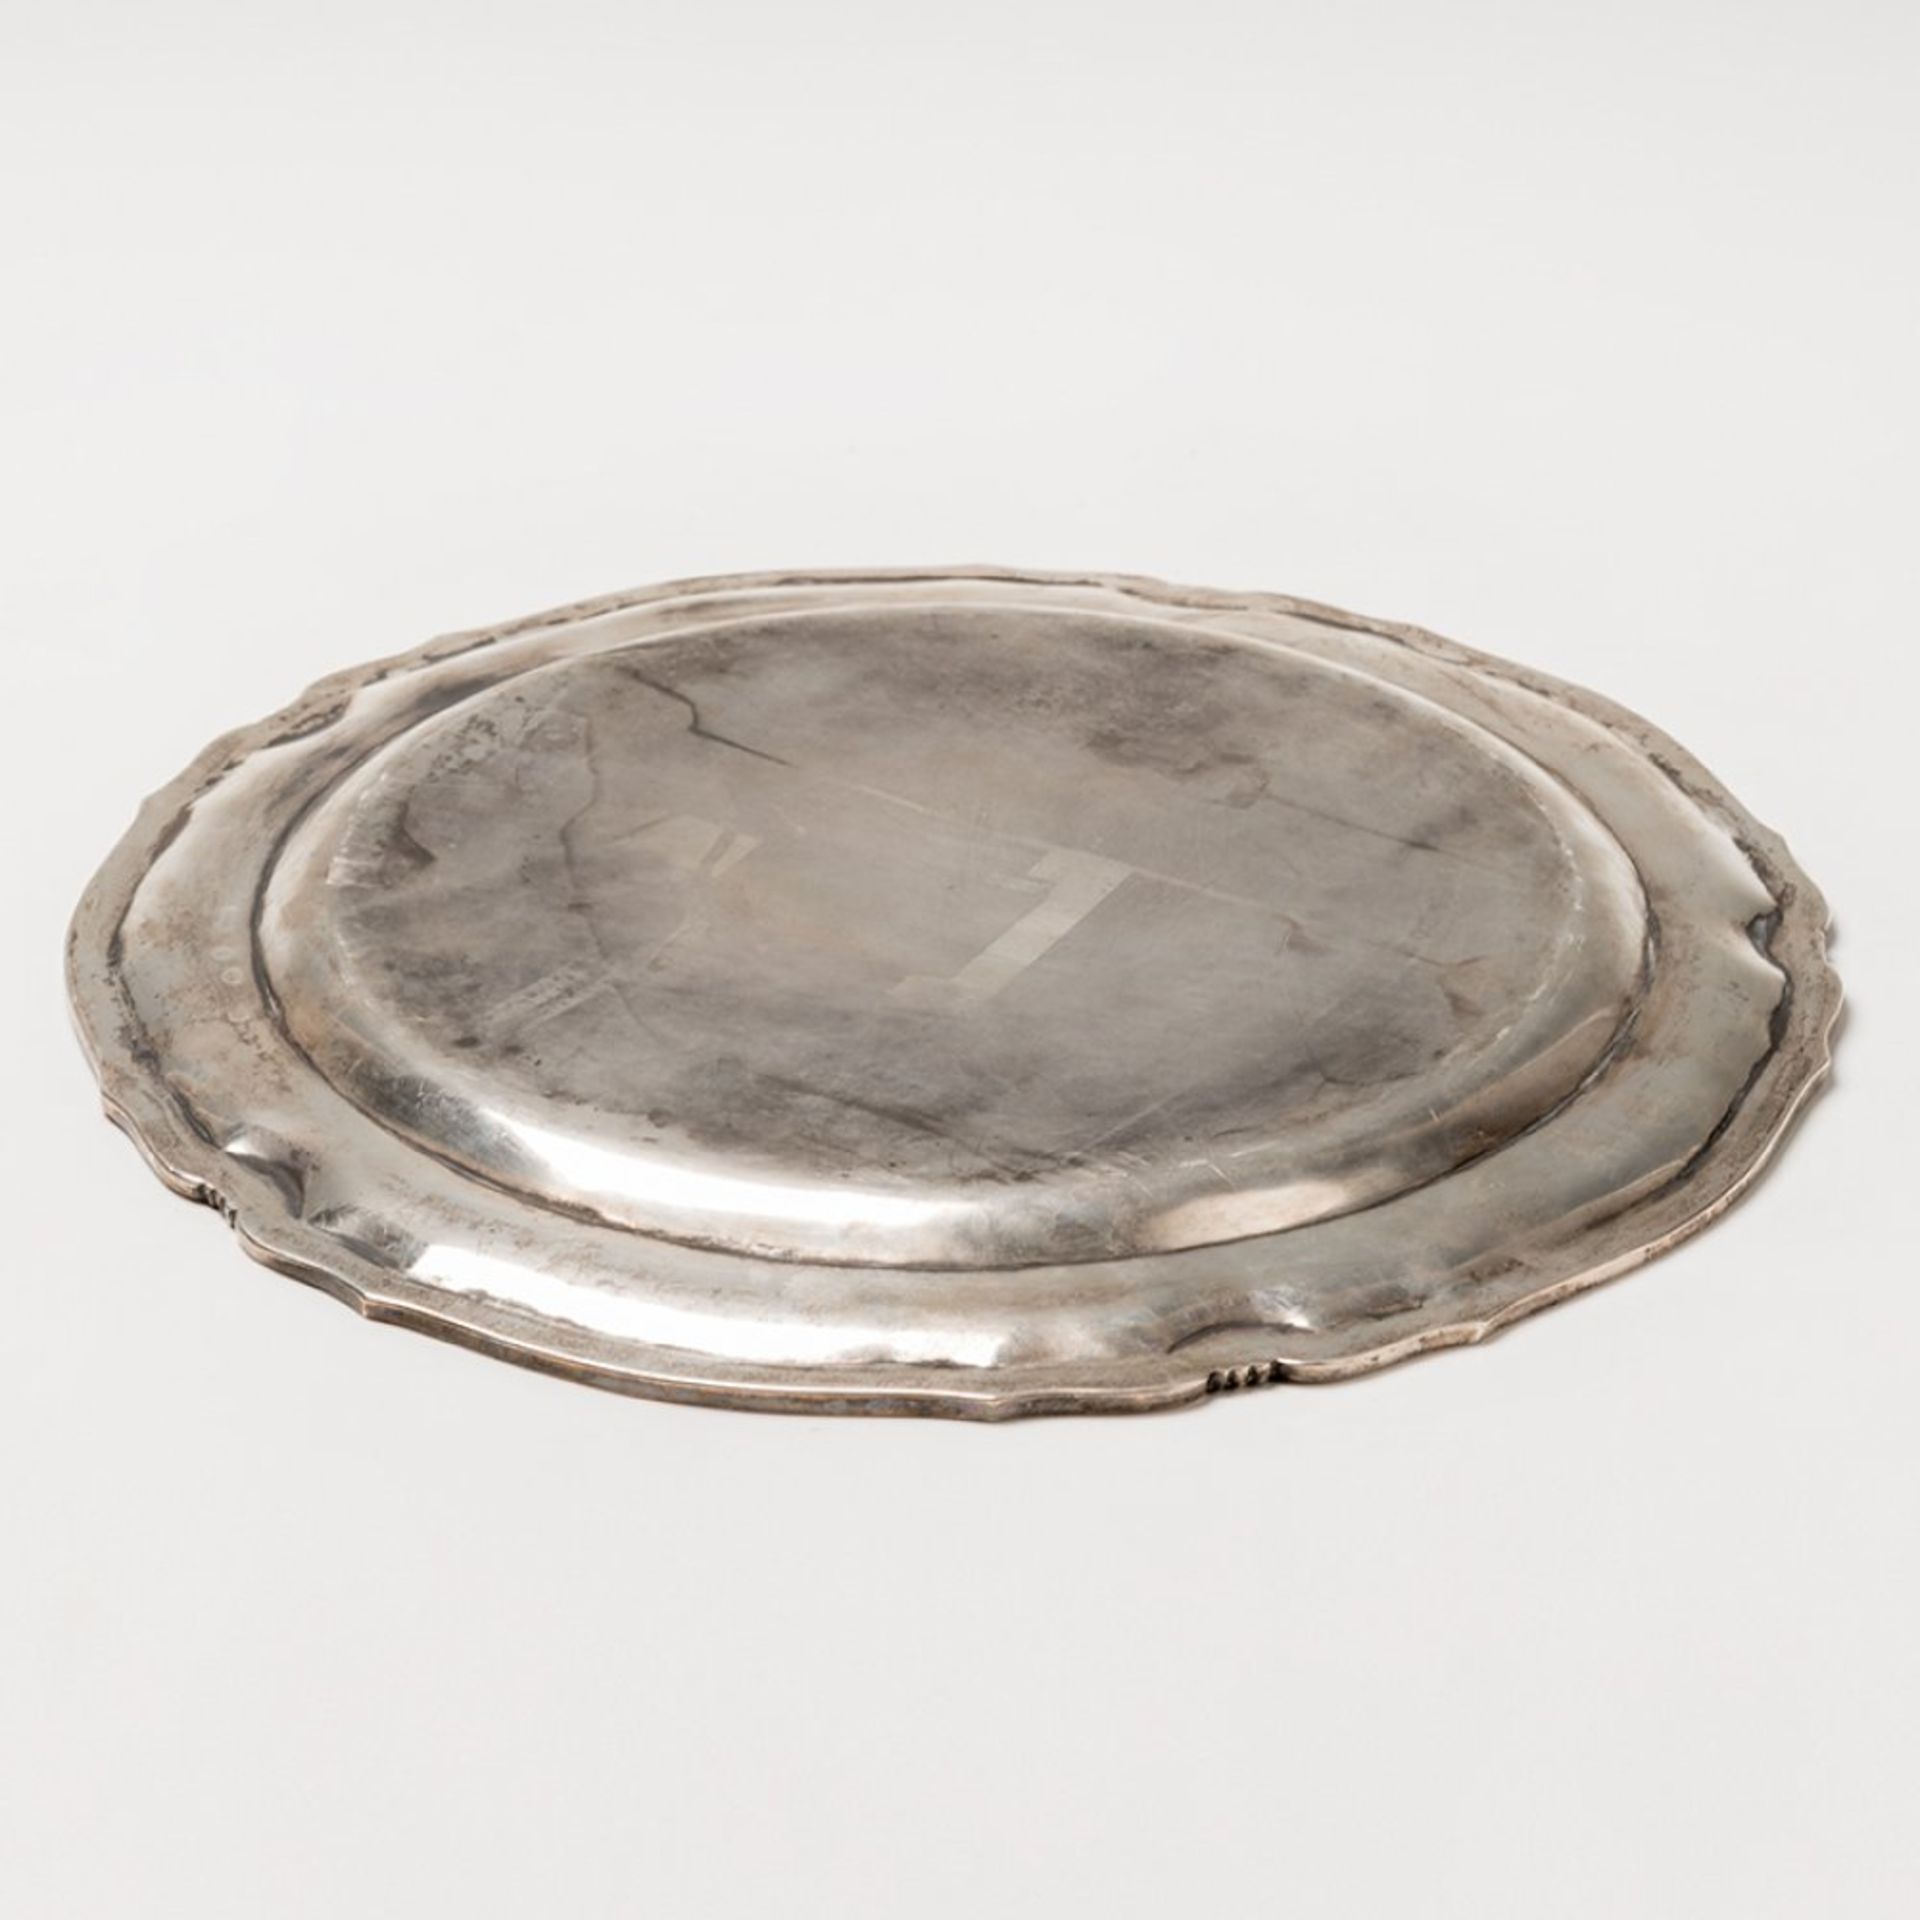 Under plate, trivet, in stamped silver. Mexico. S. XIXWeight: 779.6 g. Measure: 33 cm in diameter. - Image 2 of 5